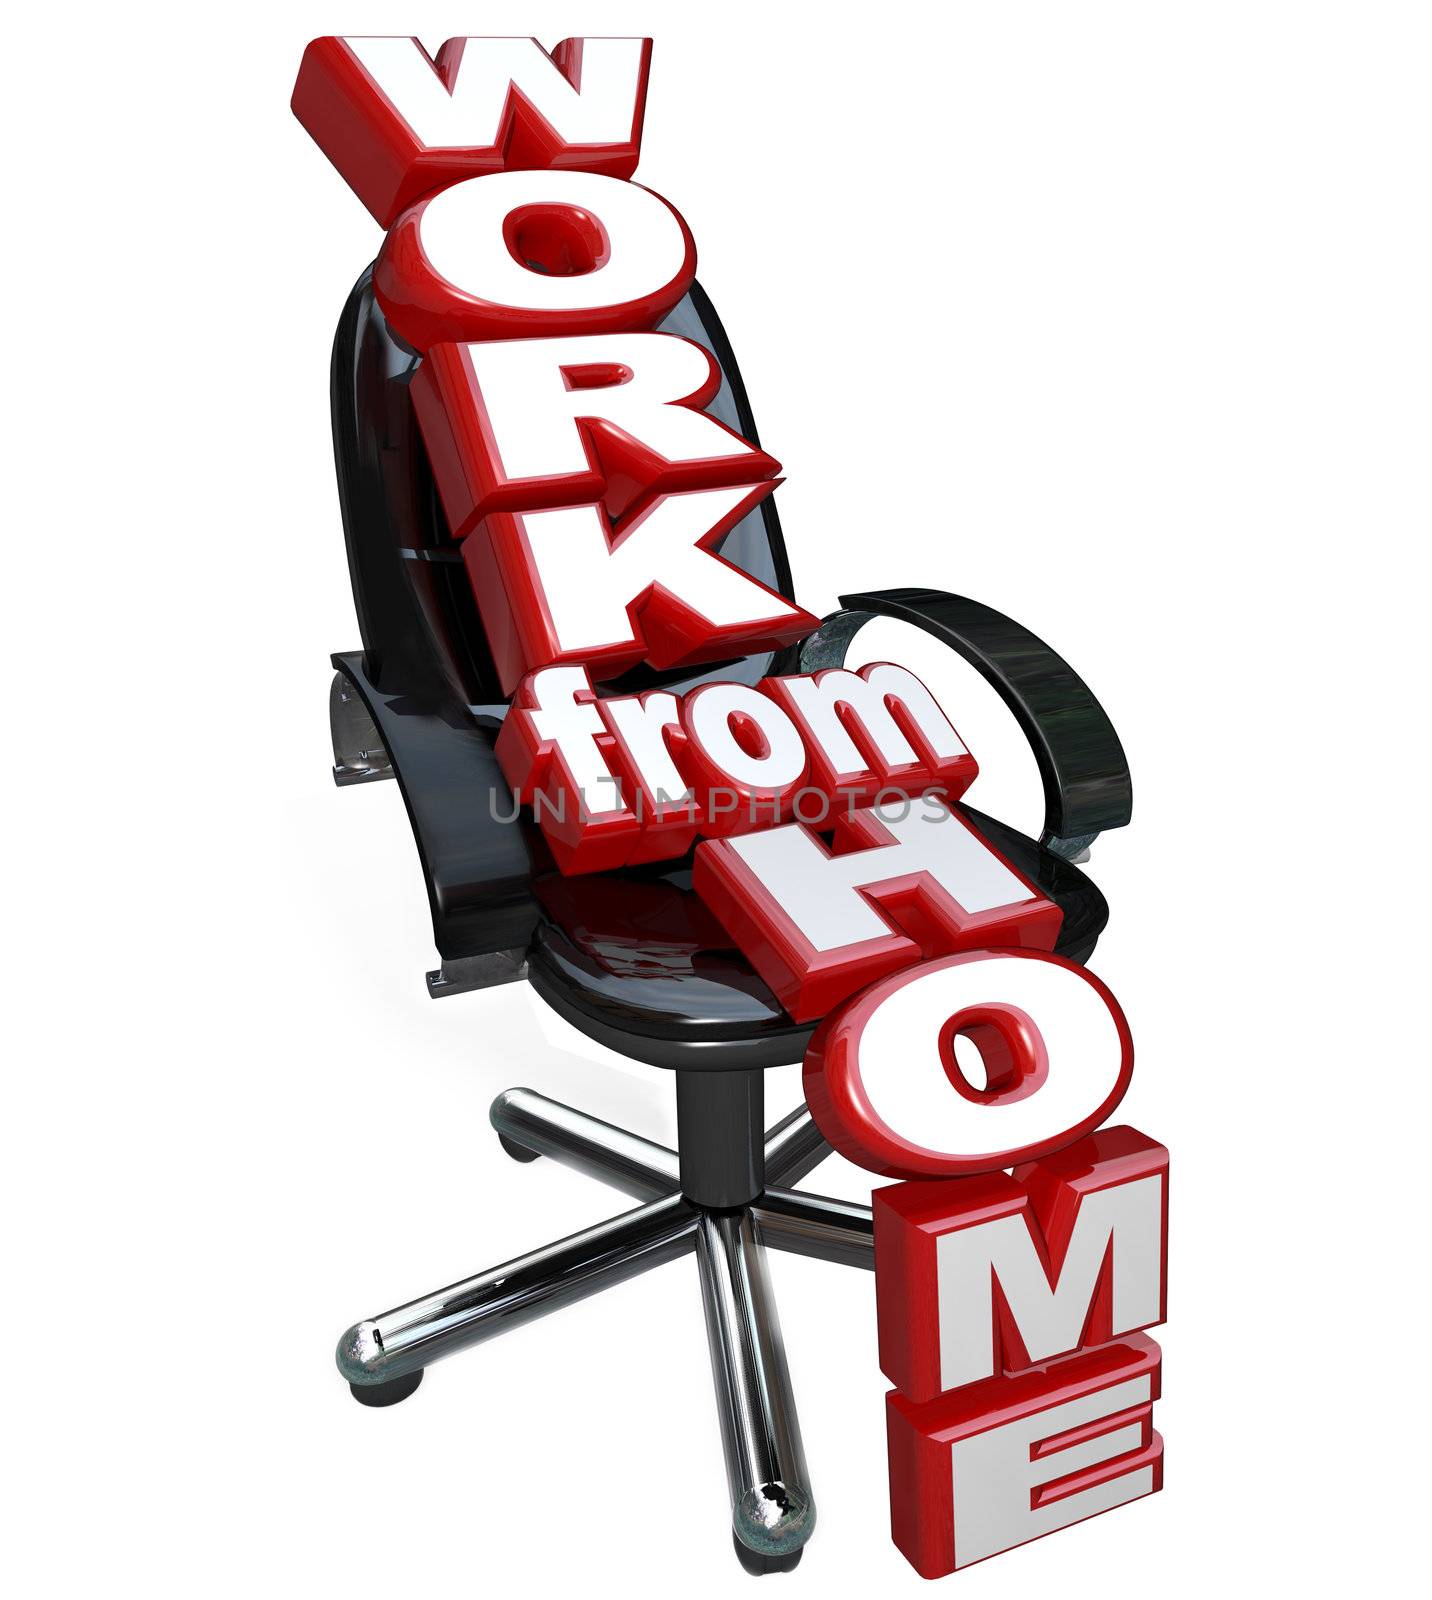 Work from Home Chair Telecommute Opportunity for Freedom by iQoncept